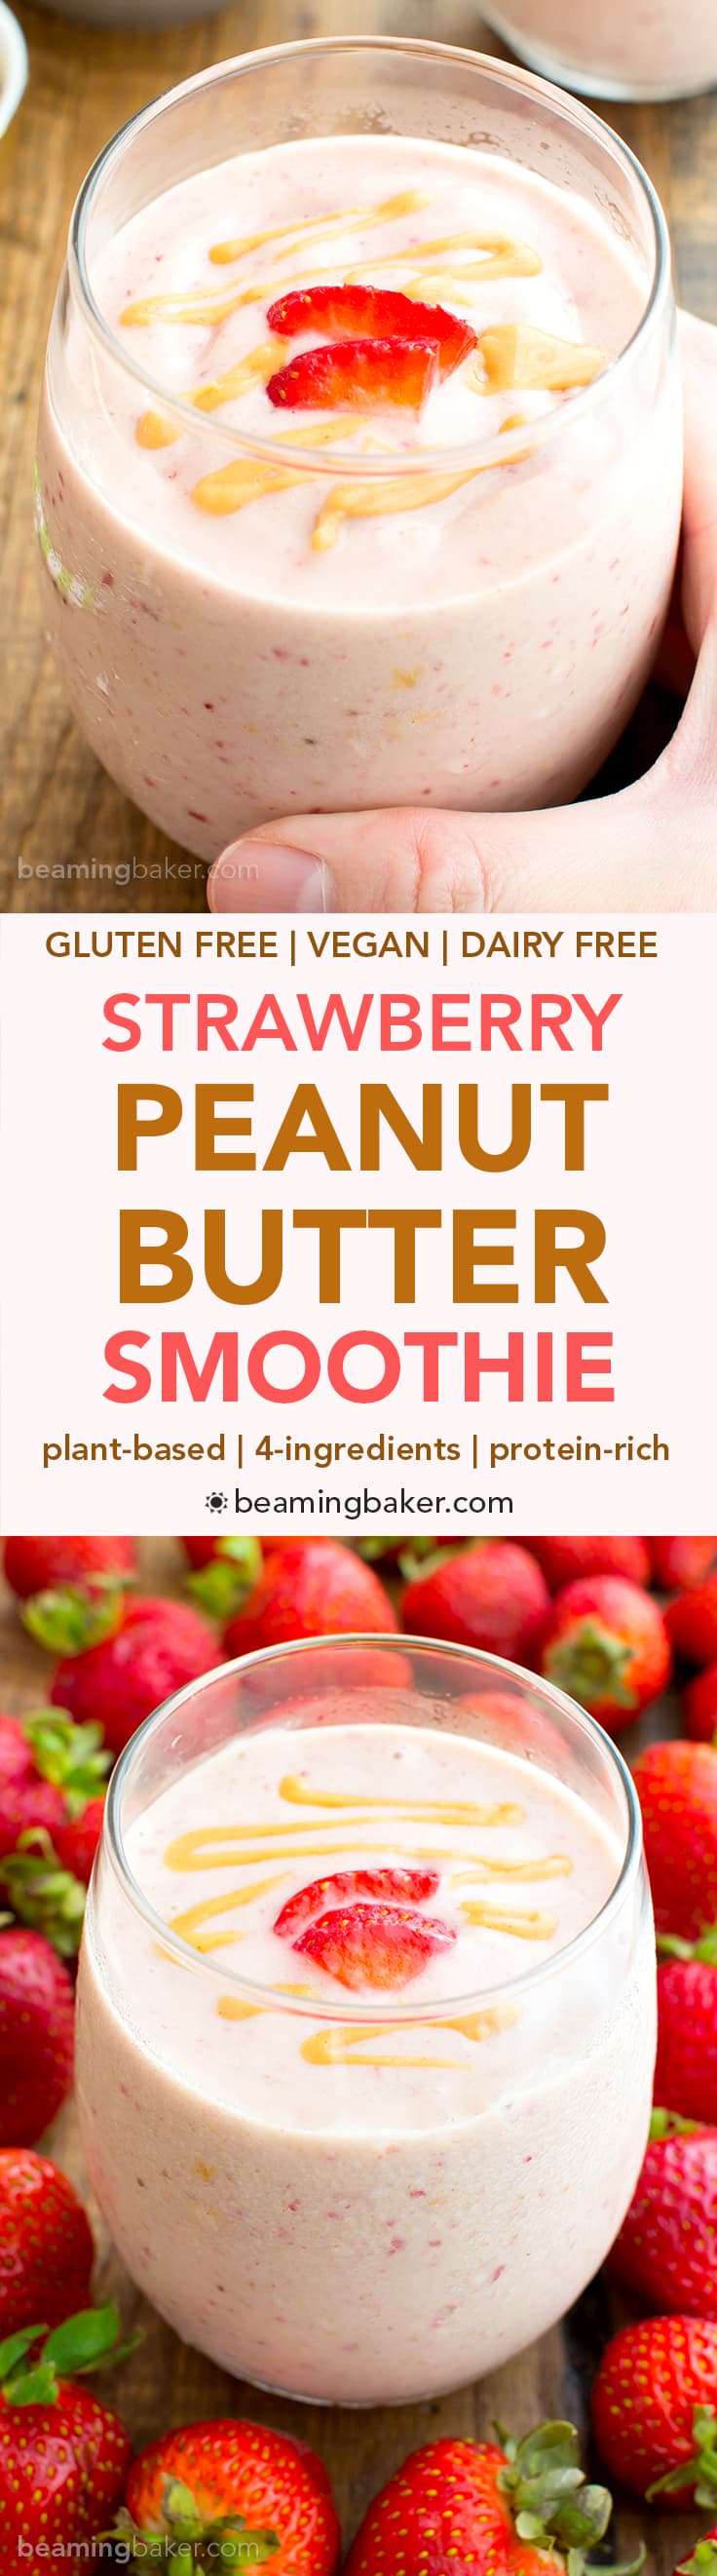 Vegan Strawberry Peanut Butter Smoothie (V+GF): an easy 4 ingredient recipe for protein-rich, creamy smoothies bursting with strawberry and PB flavor. #Vegan #GlutenFree #DairyFree | BeamingBaker.com